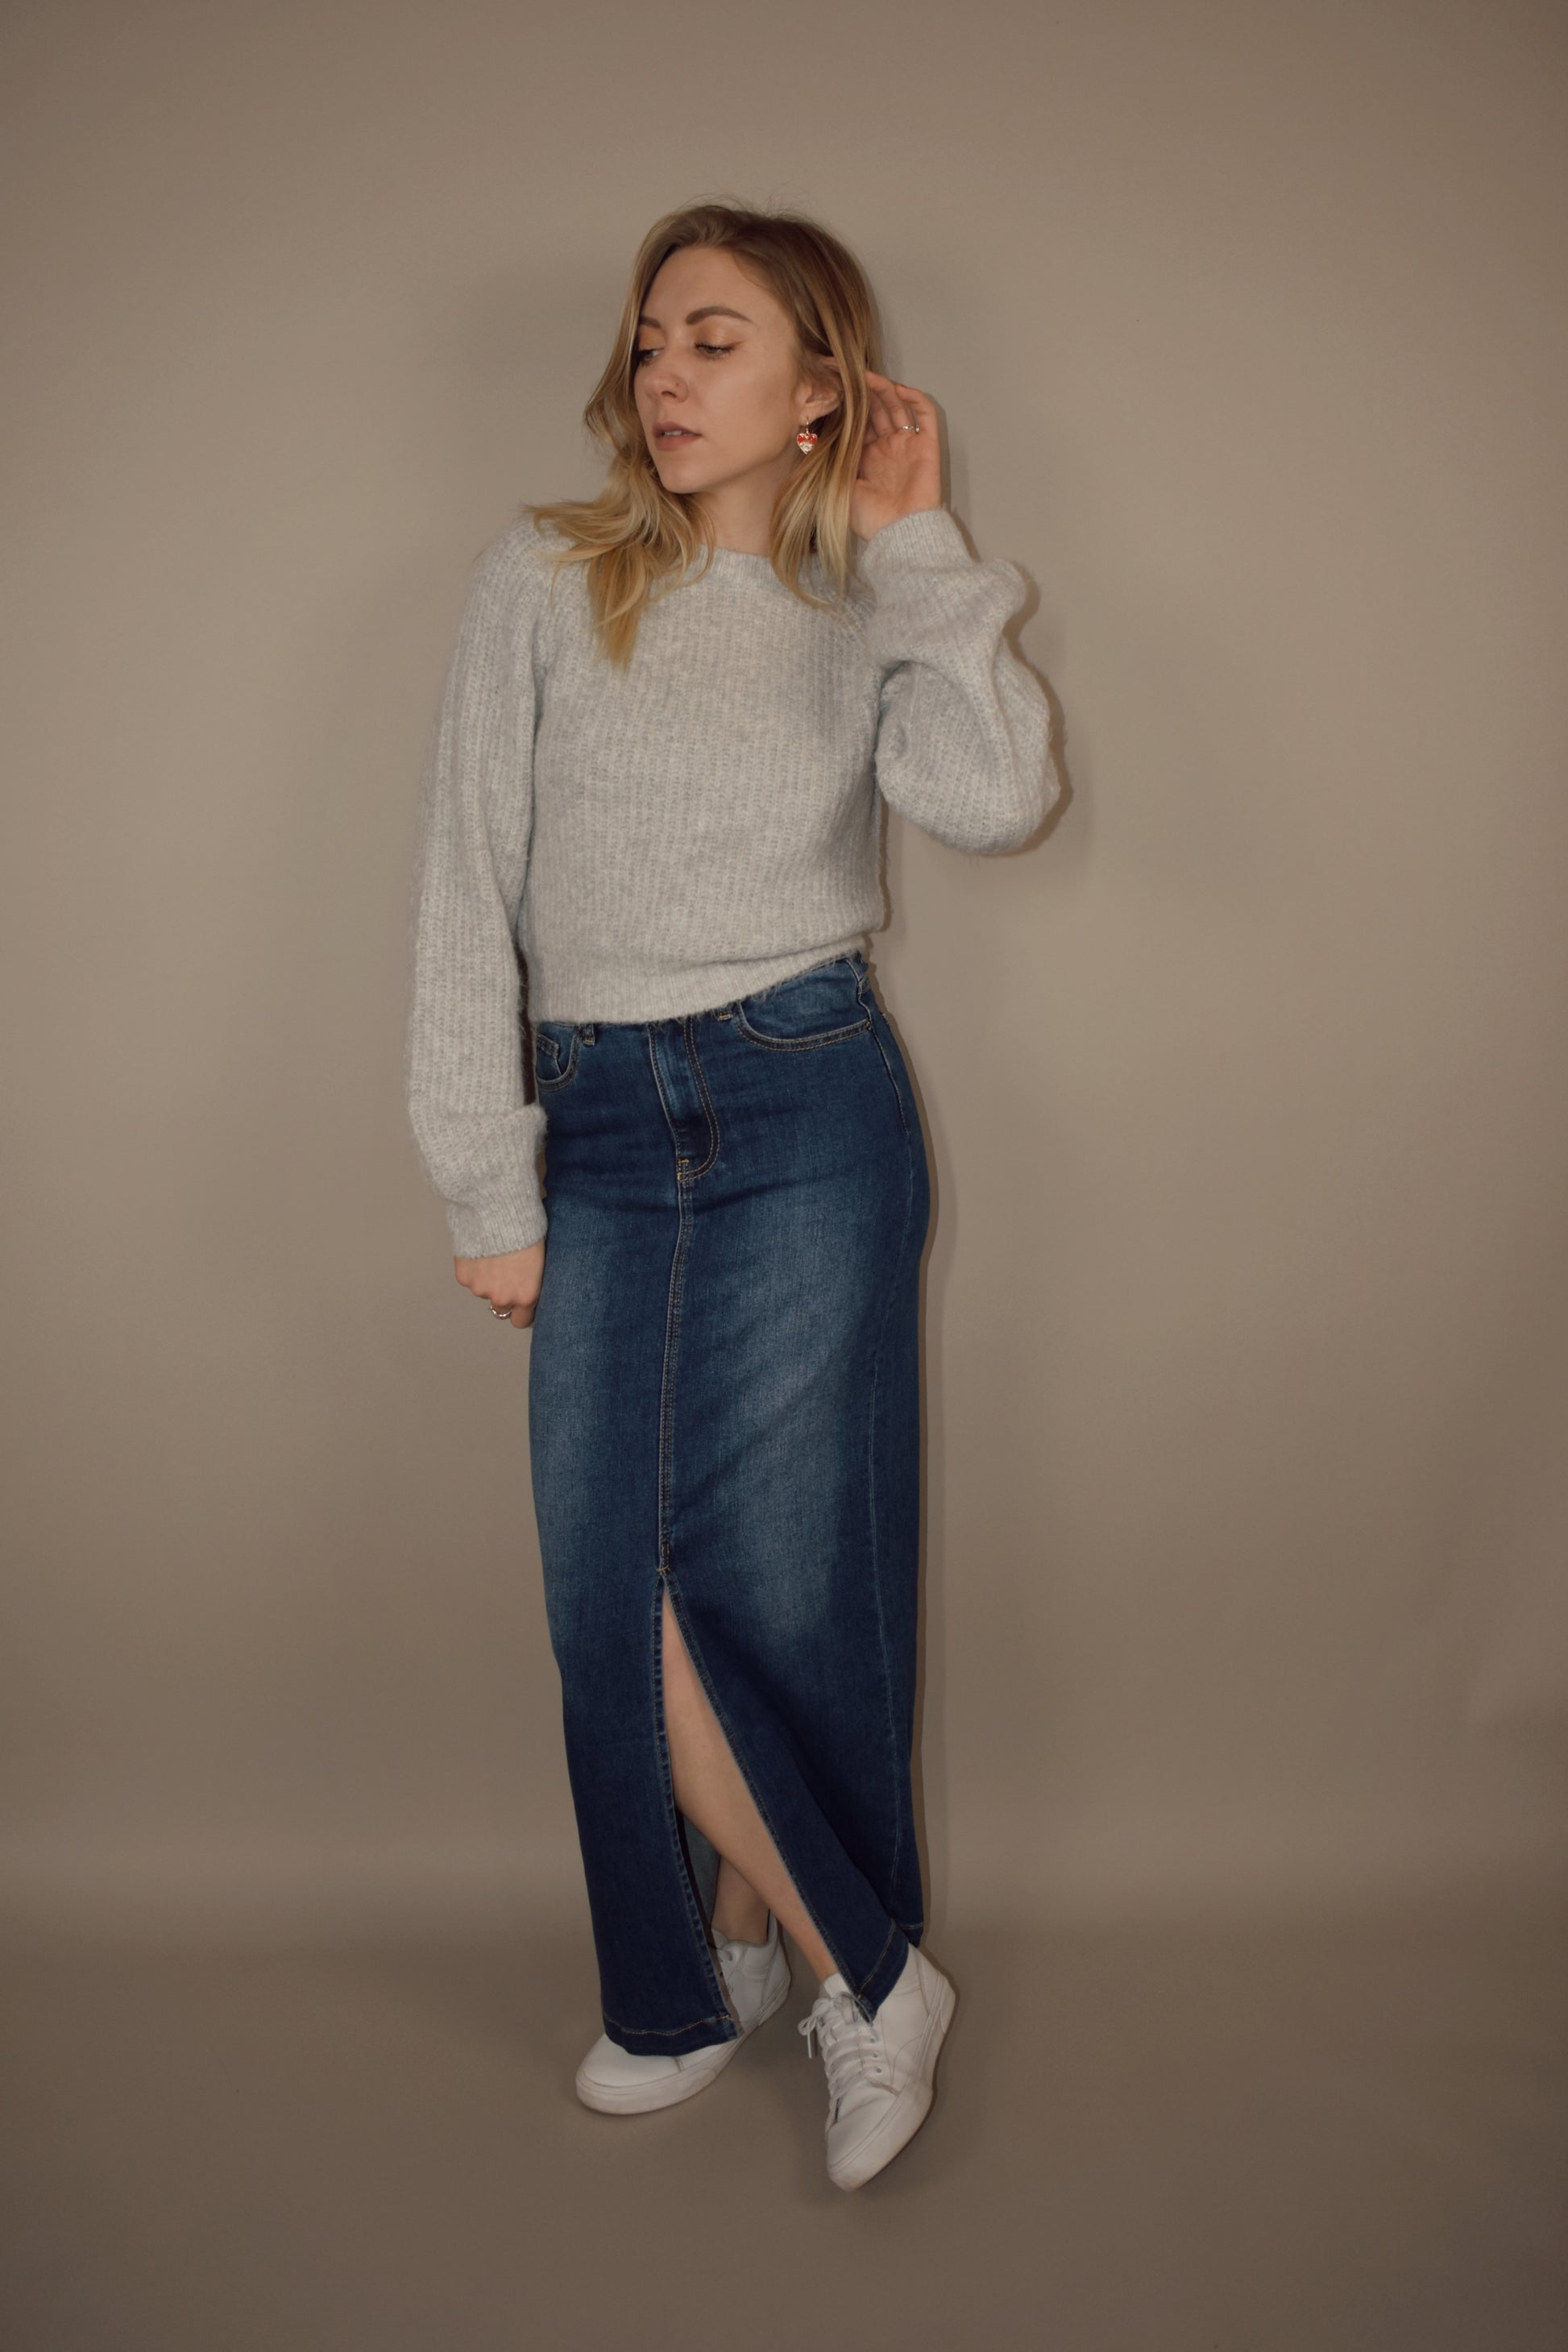 incredibly soft bubble sleeve sweater that is slightly cropped and has a crew neck